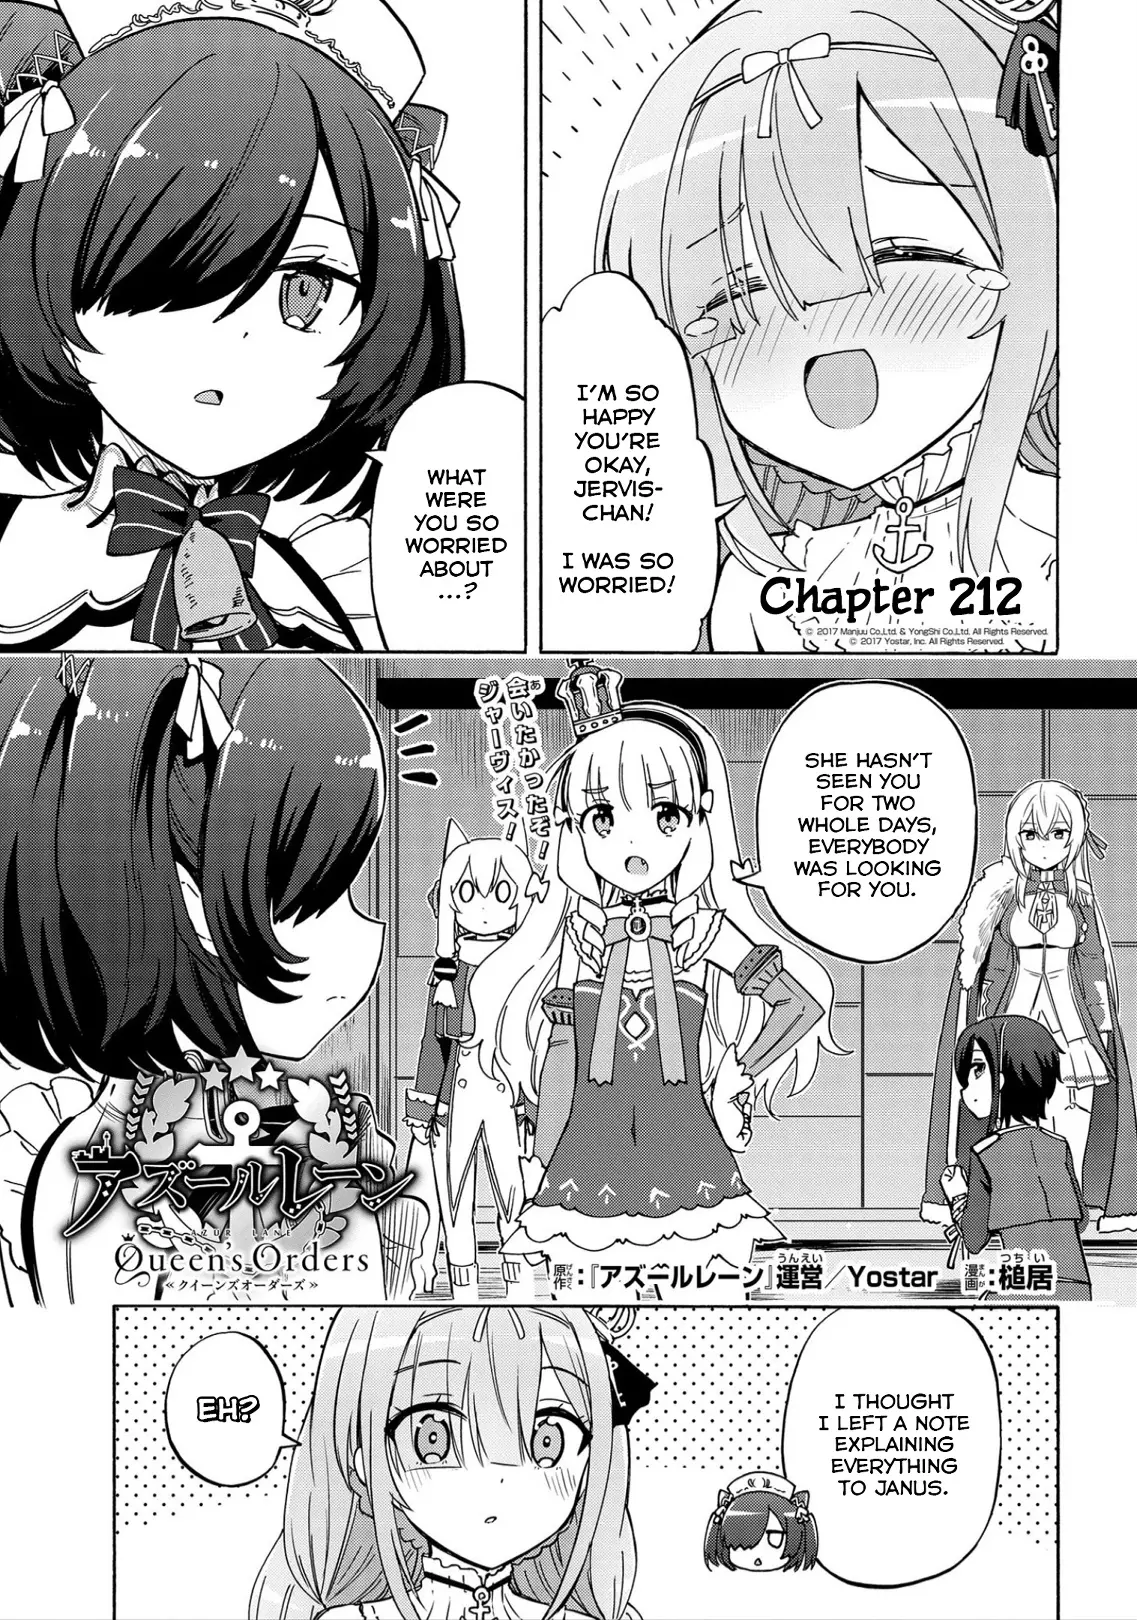 Azur Lane: Queen's Orders - 212 page 1-3a16d6b8